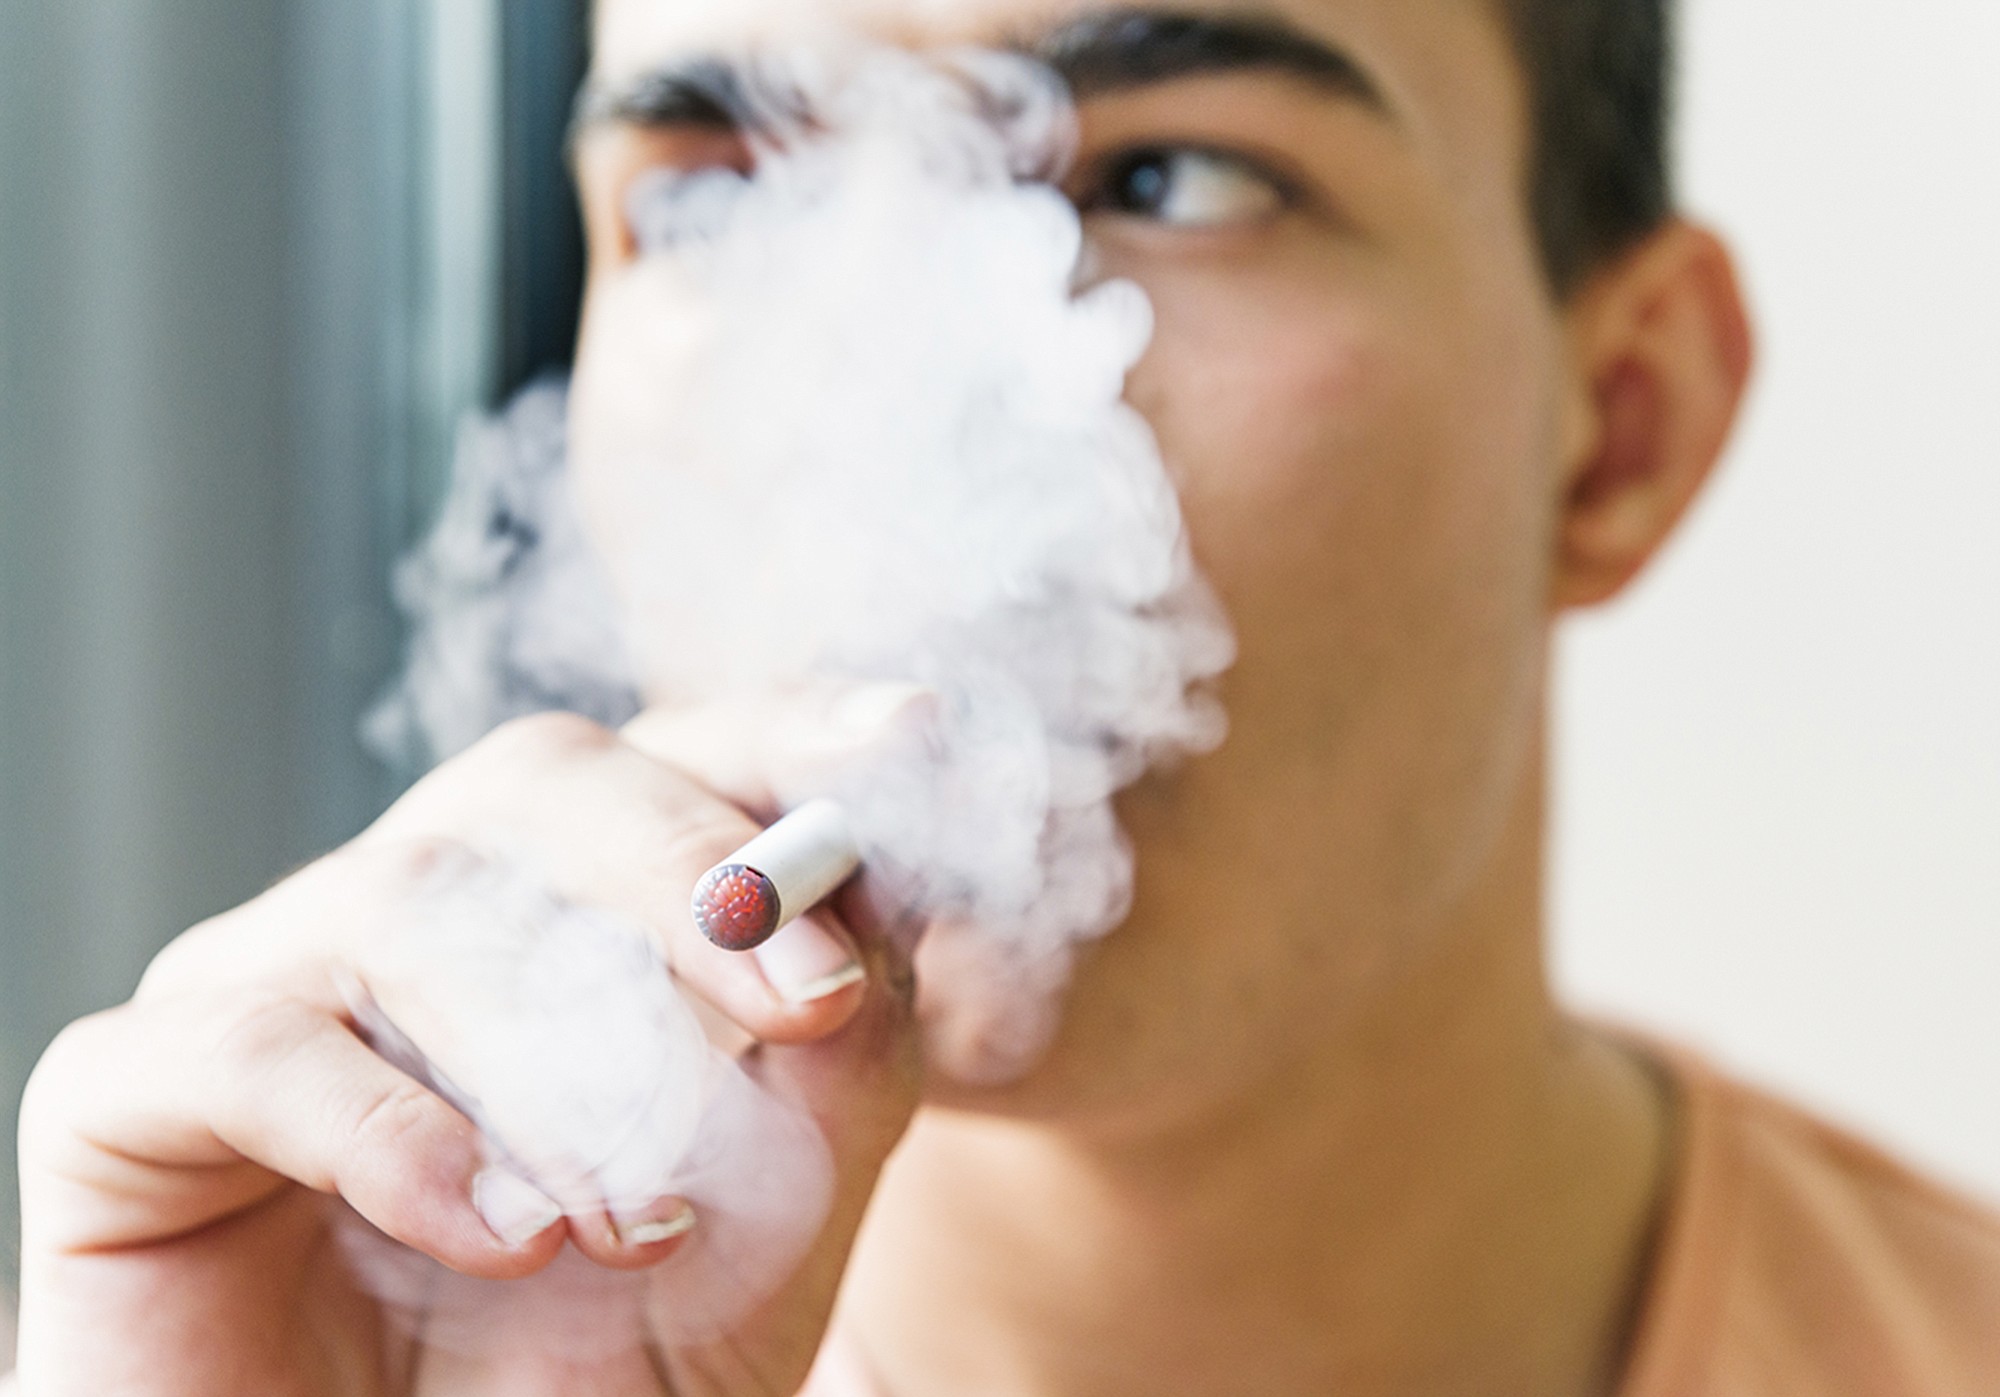 iStock
Compared with kids who had never used e-cigarettes, the ones who had used both e-cigarettes and regular were more likely to take risks and less likely to score well on measures of &quot;behavioral and emotional self-control,&quot; researchers found.